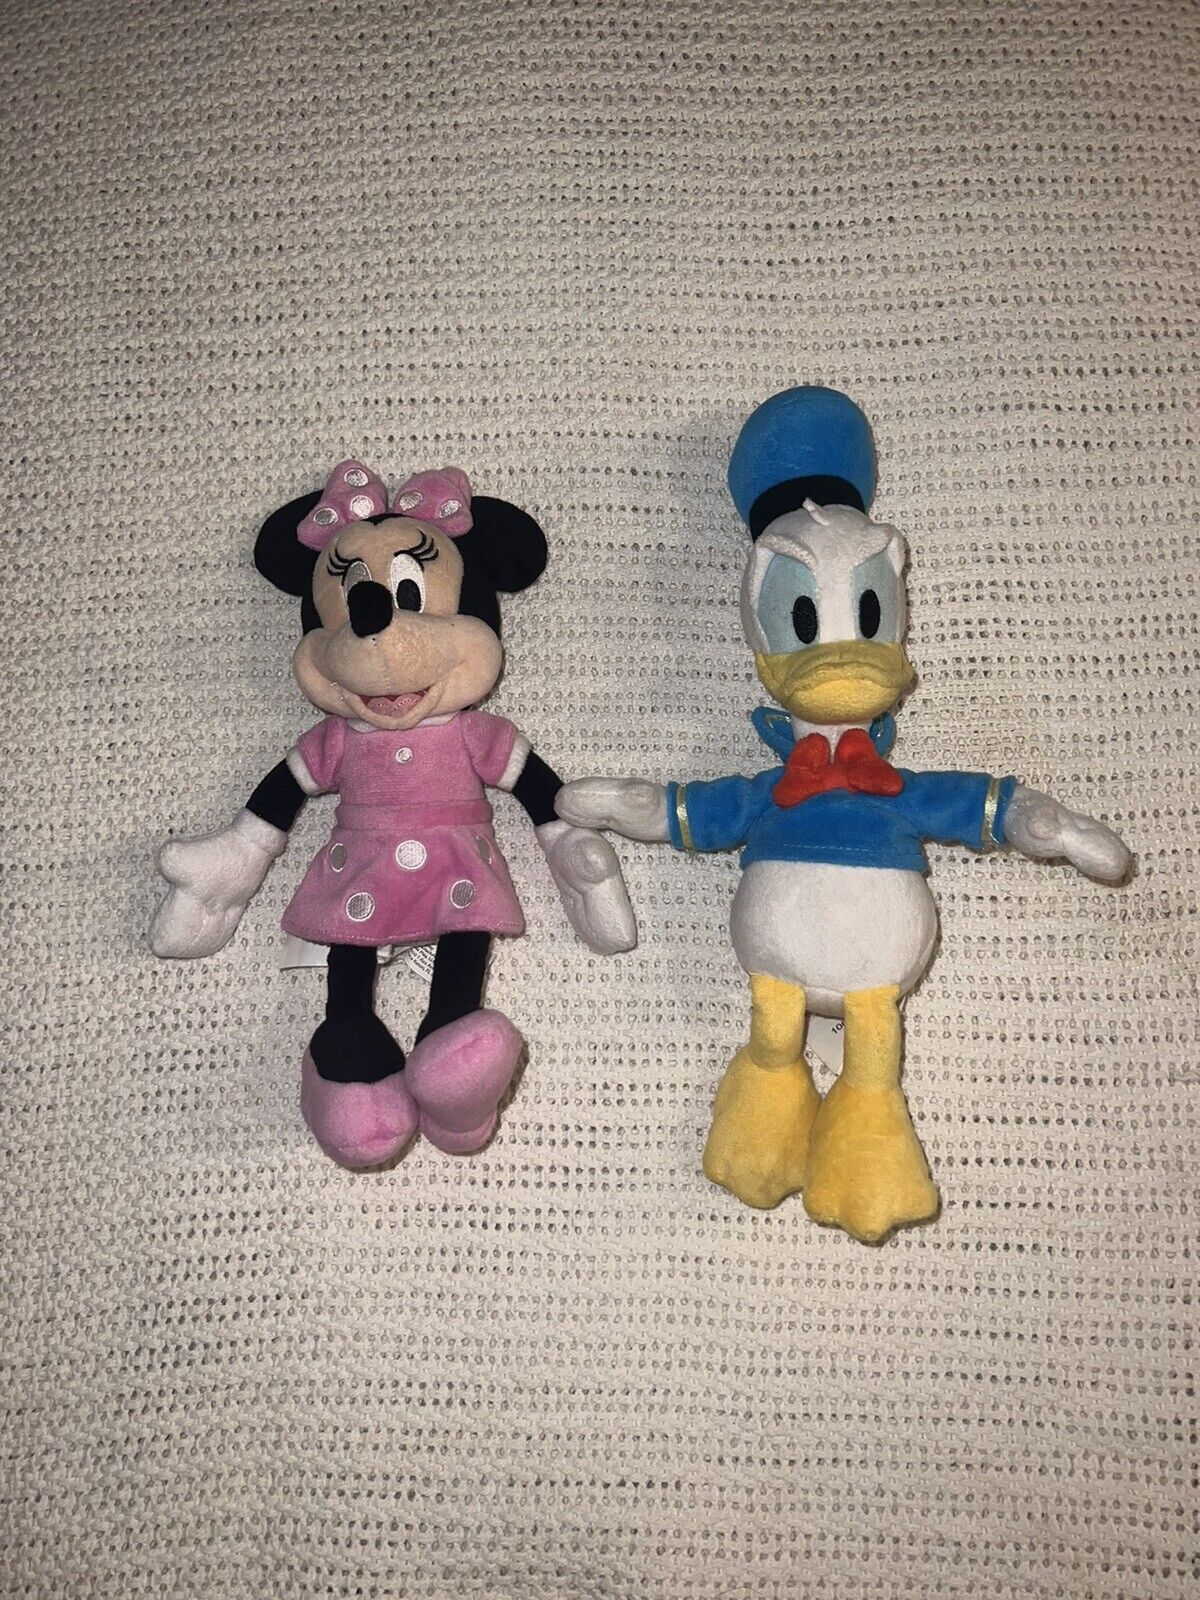 Disney Plush Minnie Mouse And Donald Duck Pair Just Play